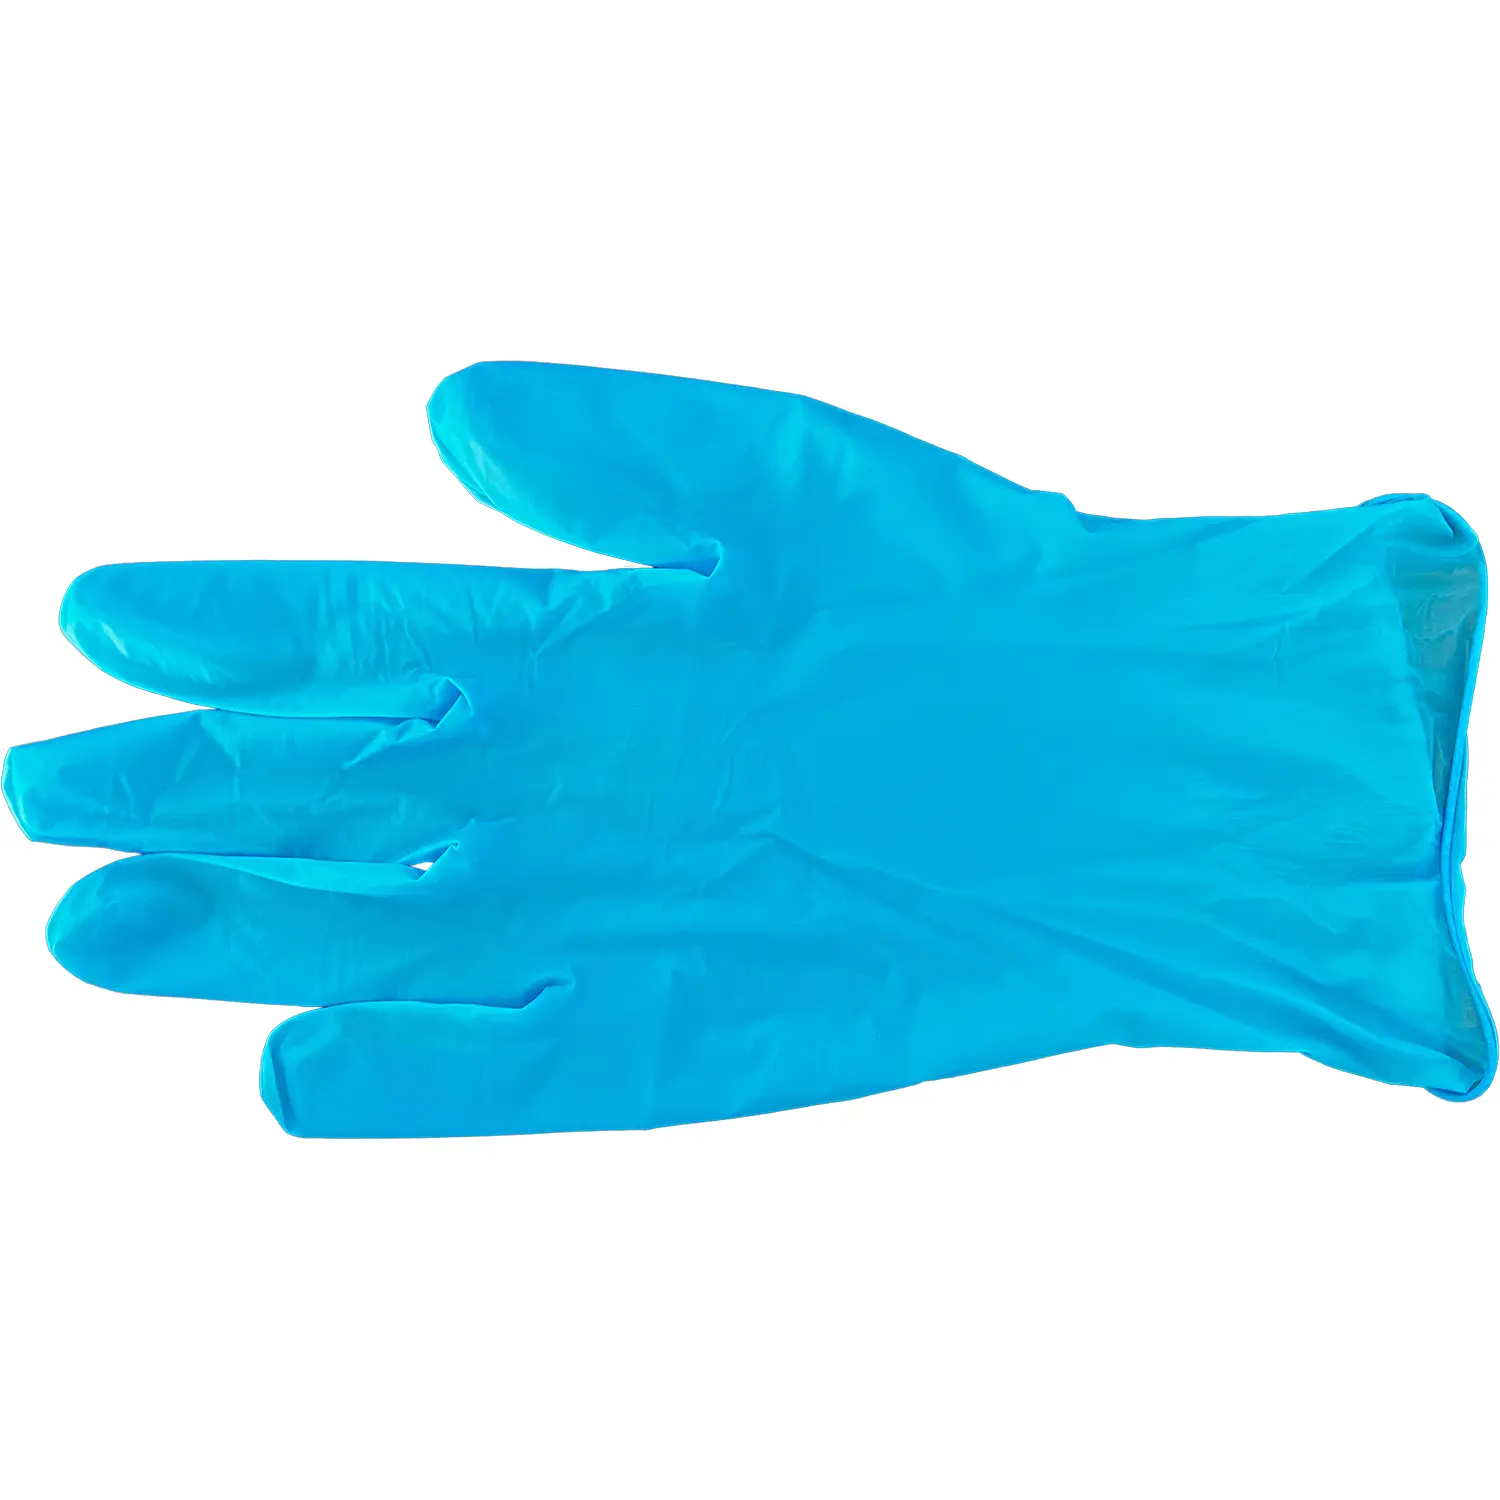 Vitrile Gloves: Cost-Effective & Durable Solution for Safety